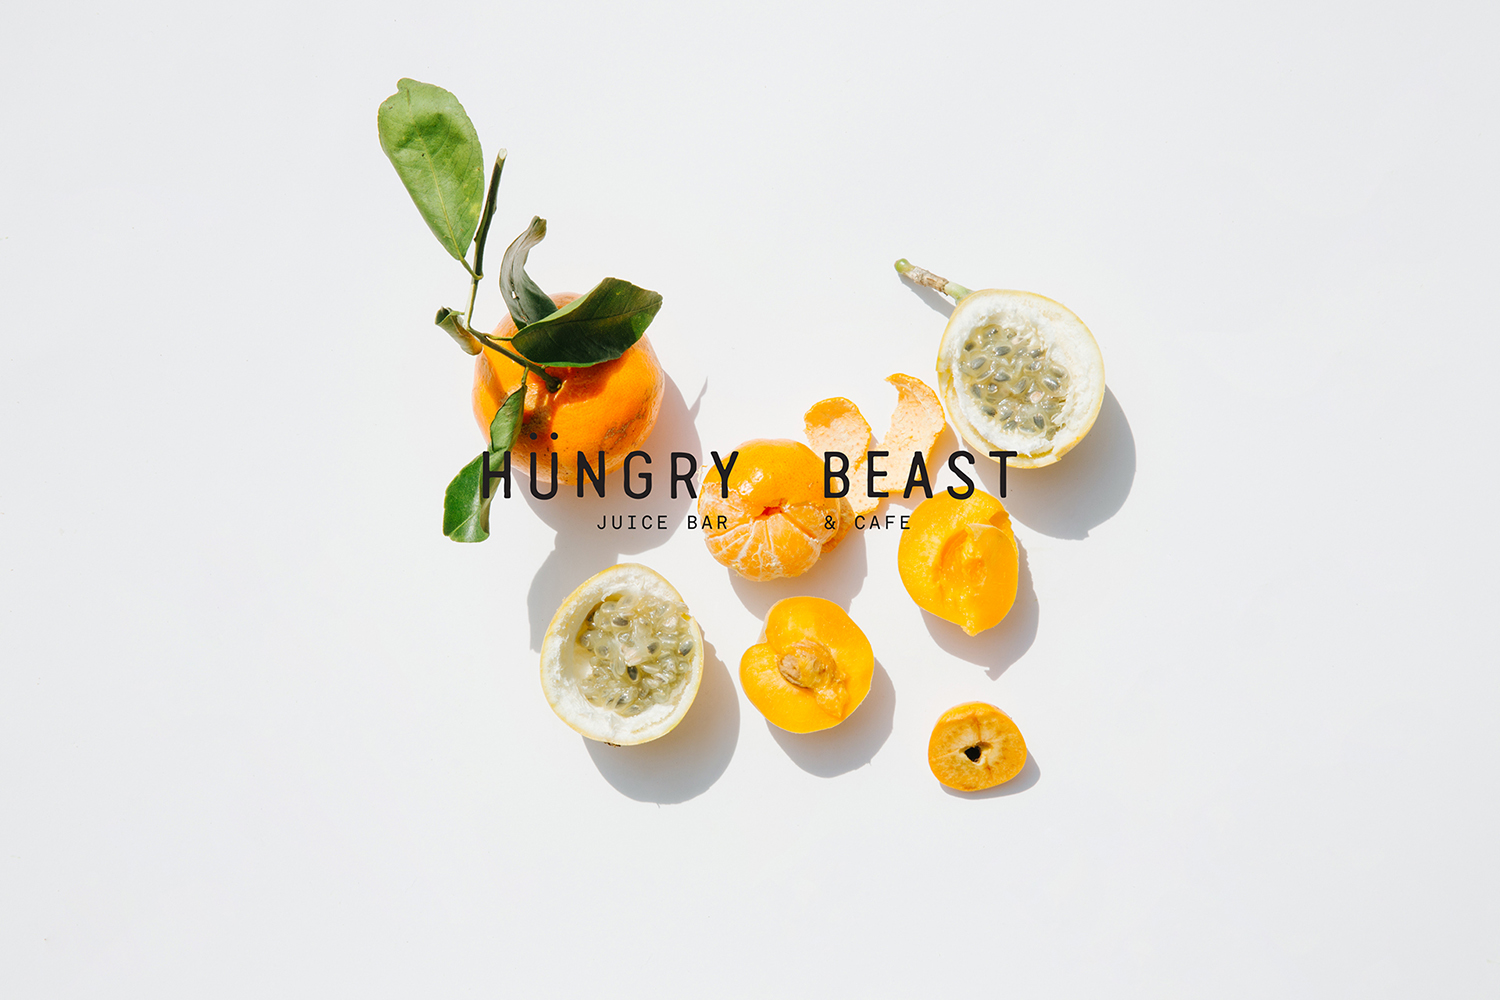 Logo and art direction designed by Savvy for Mexican cafe and juice bar Hüngry Beast